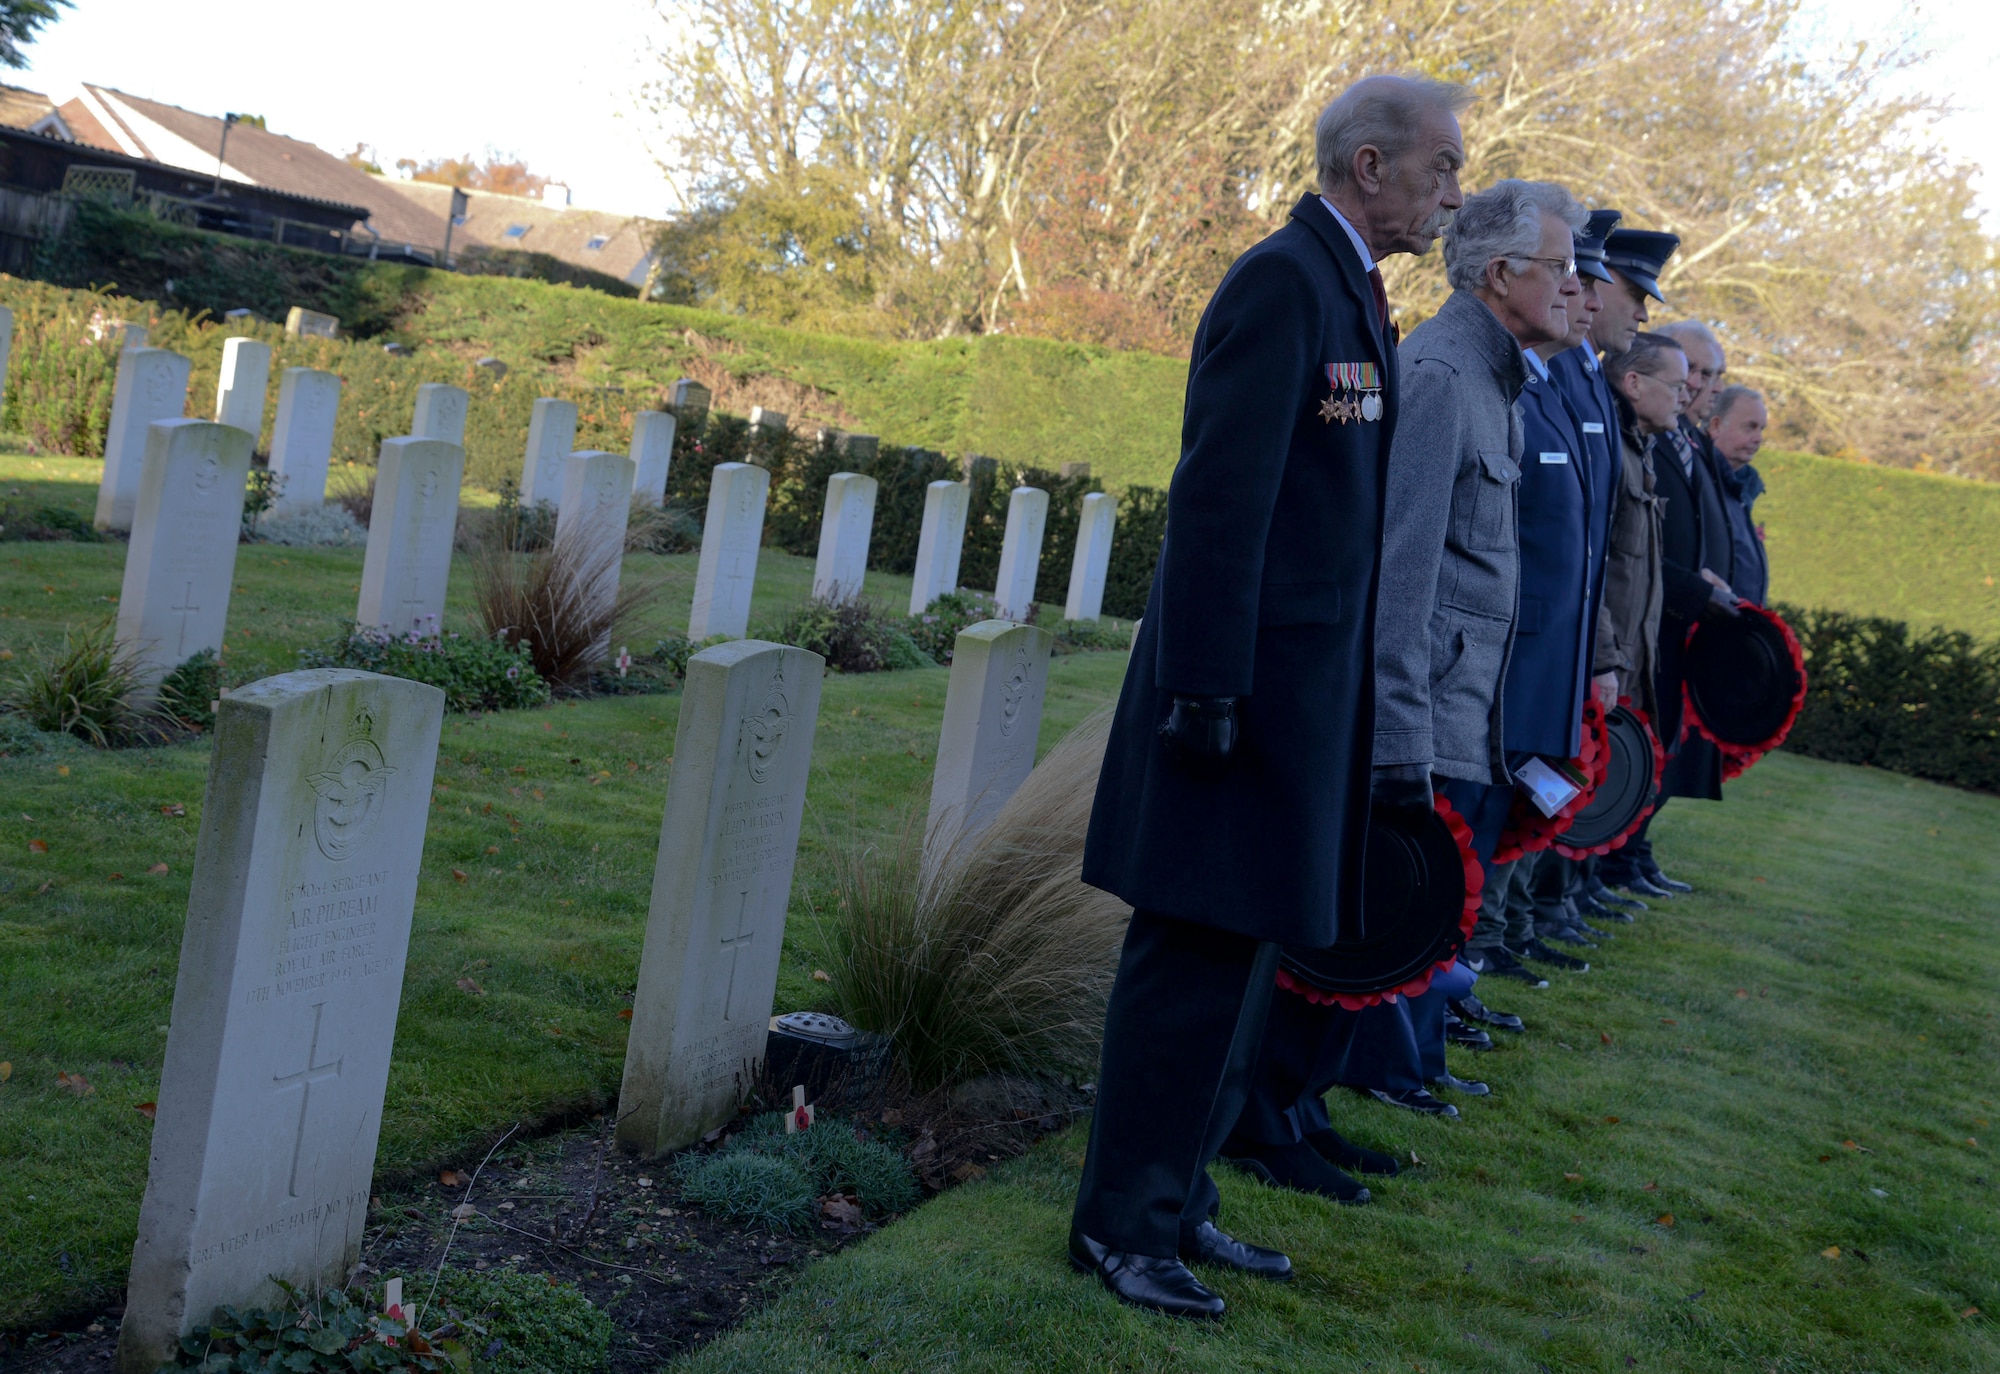 U.S. Airmen from RAF Mildenhall and local representatives prepare to lay wreaths of poppies on the St. John’s Church War Graves Memorial in Beck Row, England, Nov. 12, 2017.  The red flowers were chosen as the symbol of Remembrance Day to commemorate the lives lost in the poppy fields of Flanders, Belgium, during World War I. (U.S. Air Force photo by Senior Airman Justine Rho)